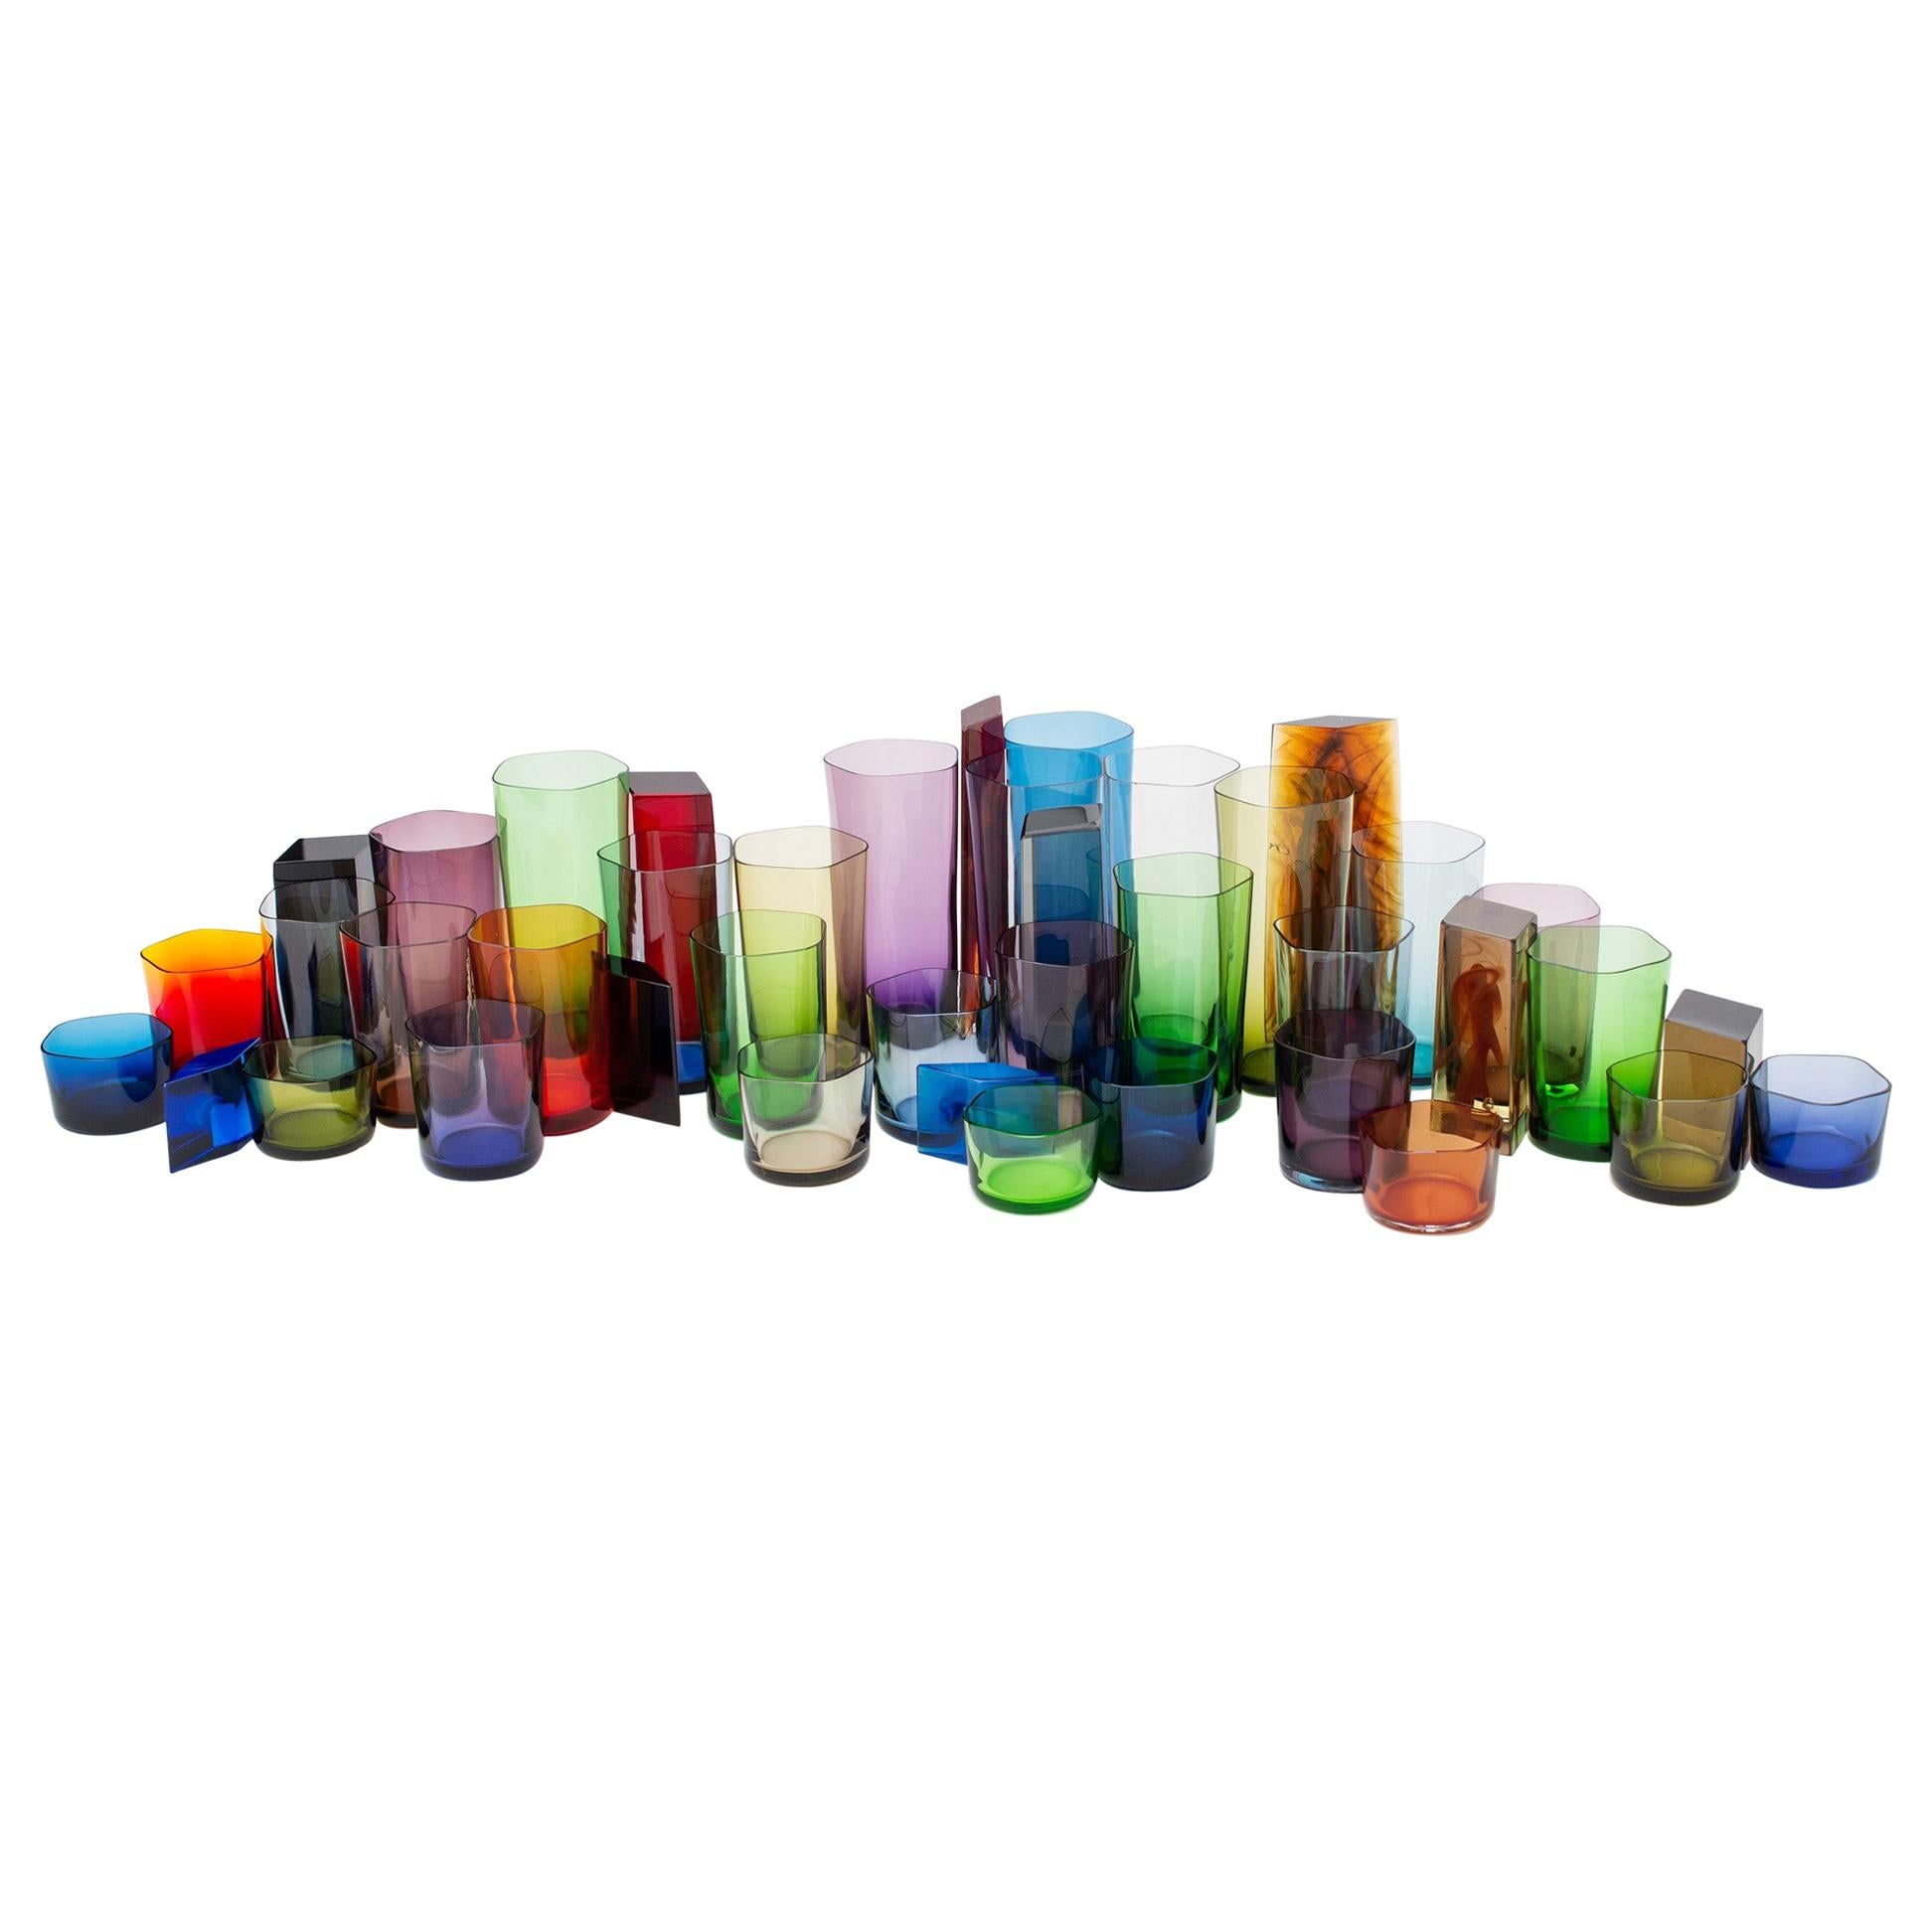 Polygon Glassware by Omer Arbel For OAO Works, Geometric Blown Glass Sculpture For Sale